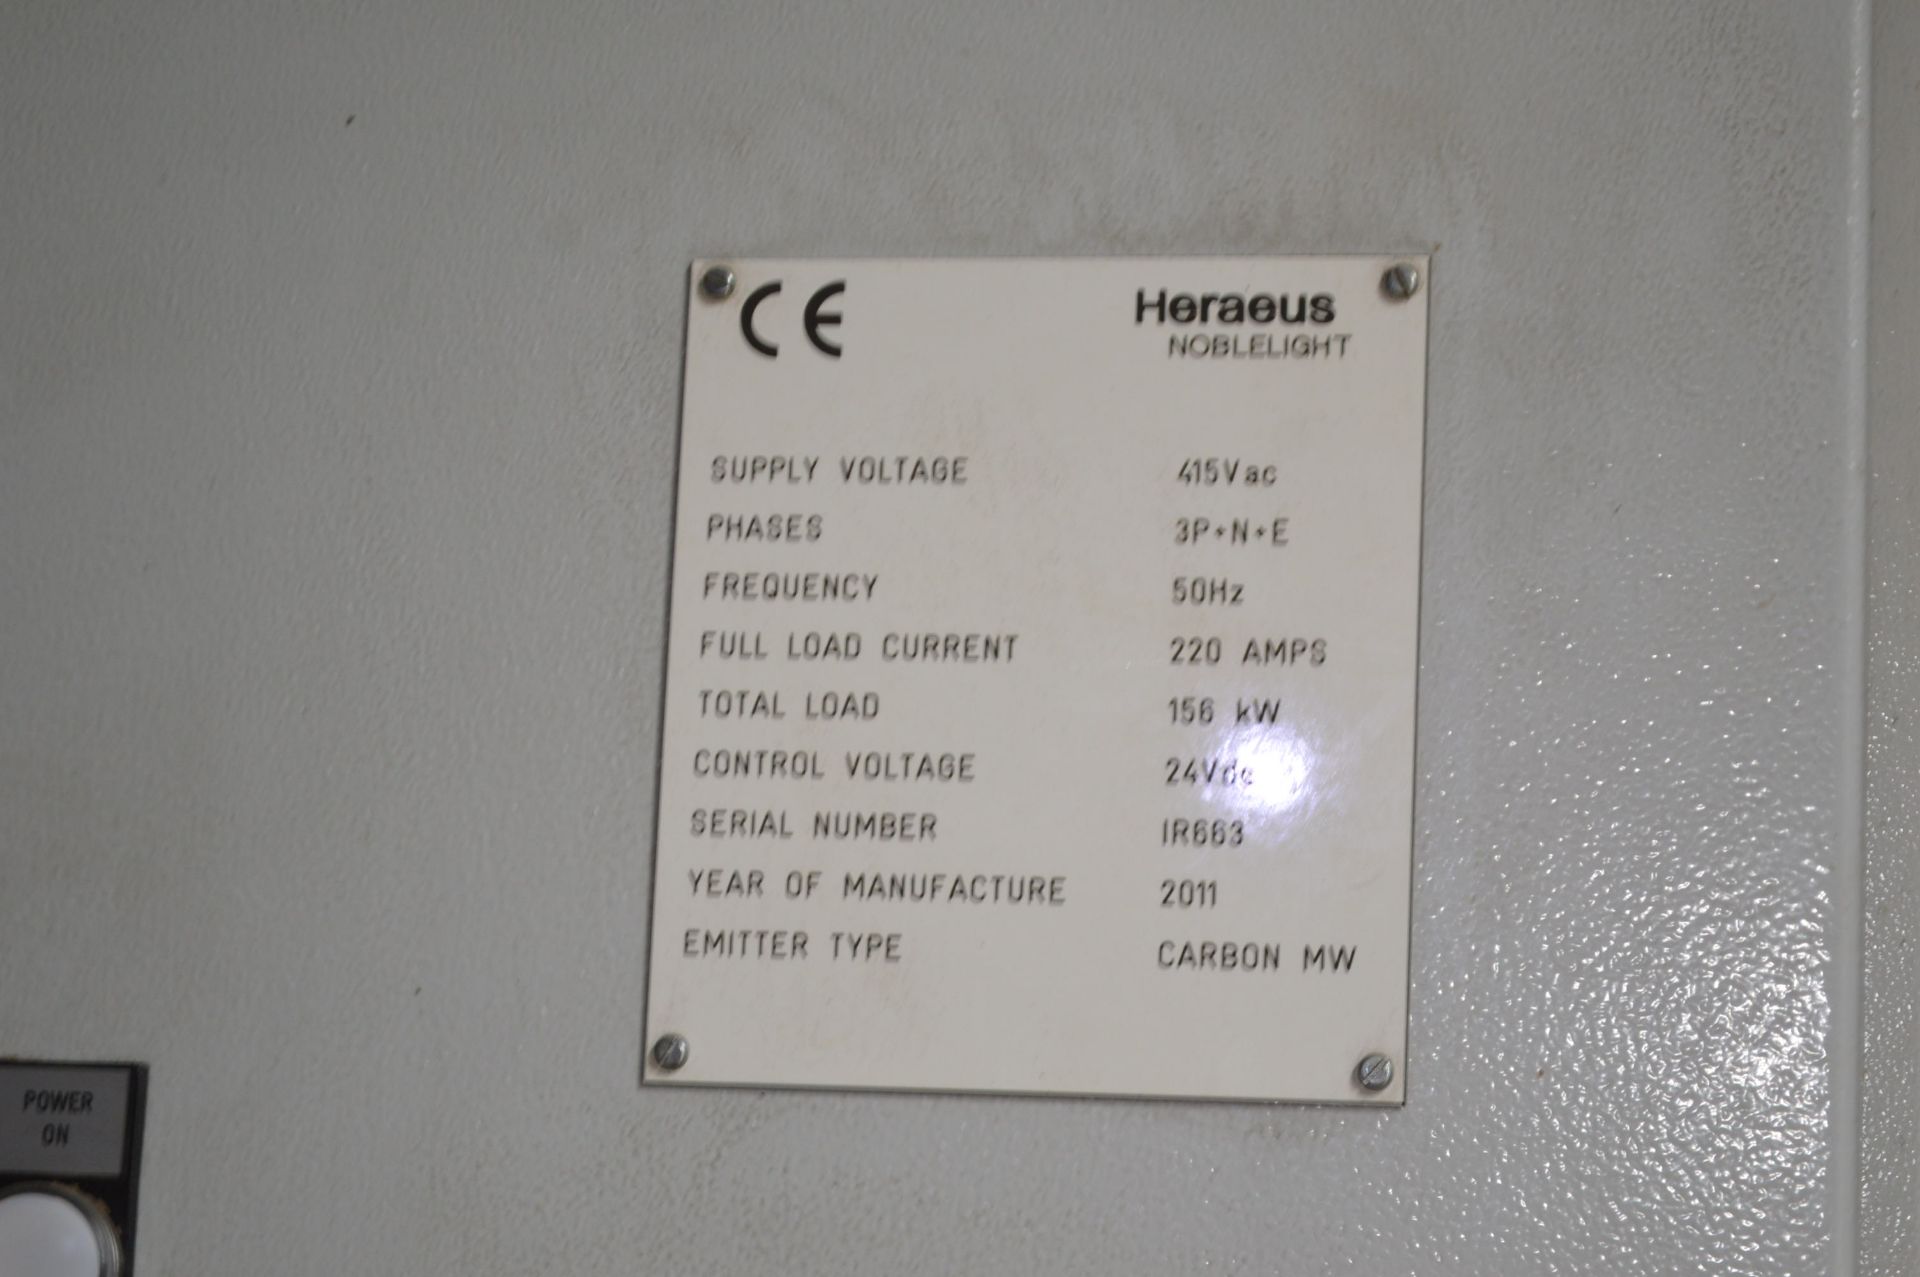 Heraeus approx. 1.1m wide INFRA-RED THERMAL HEATING UNIT, with control panel (one heater element - Image 6 of 6